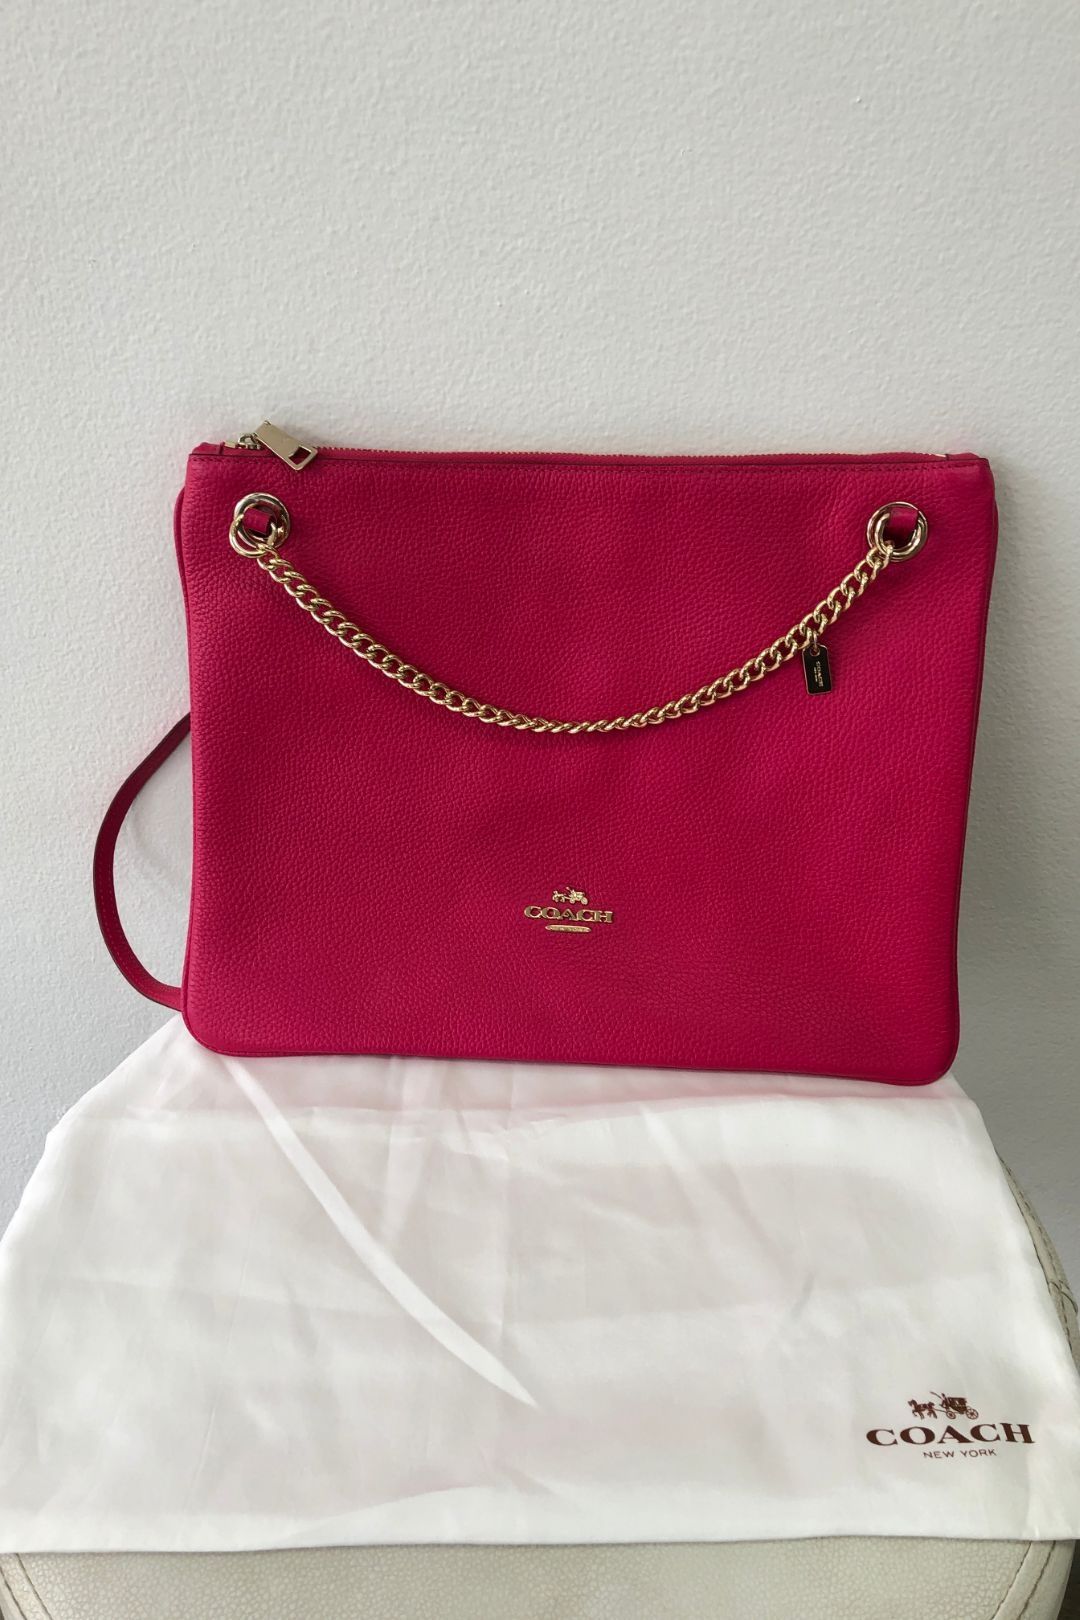 Coach - Hot Pink Pebbled Leather Crossbody Bag